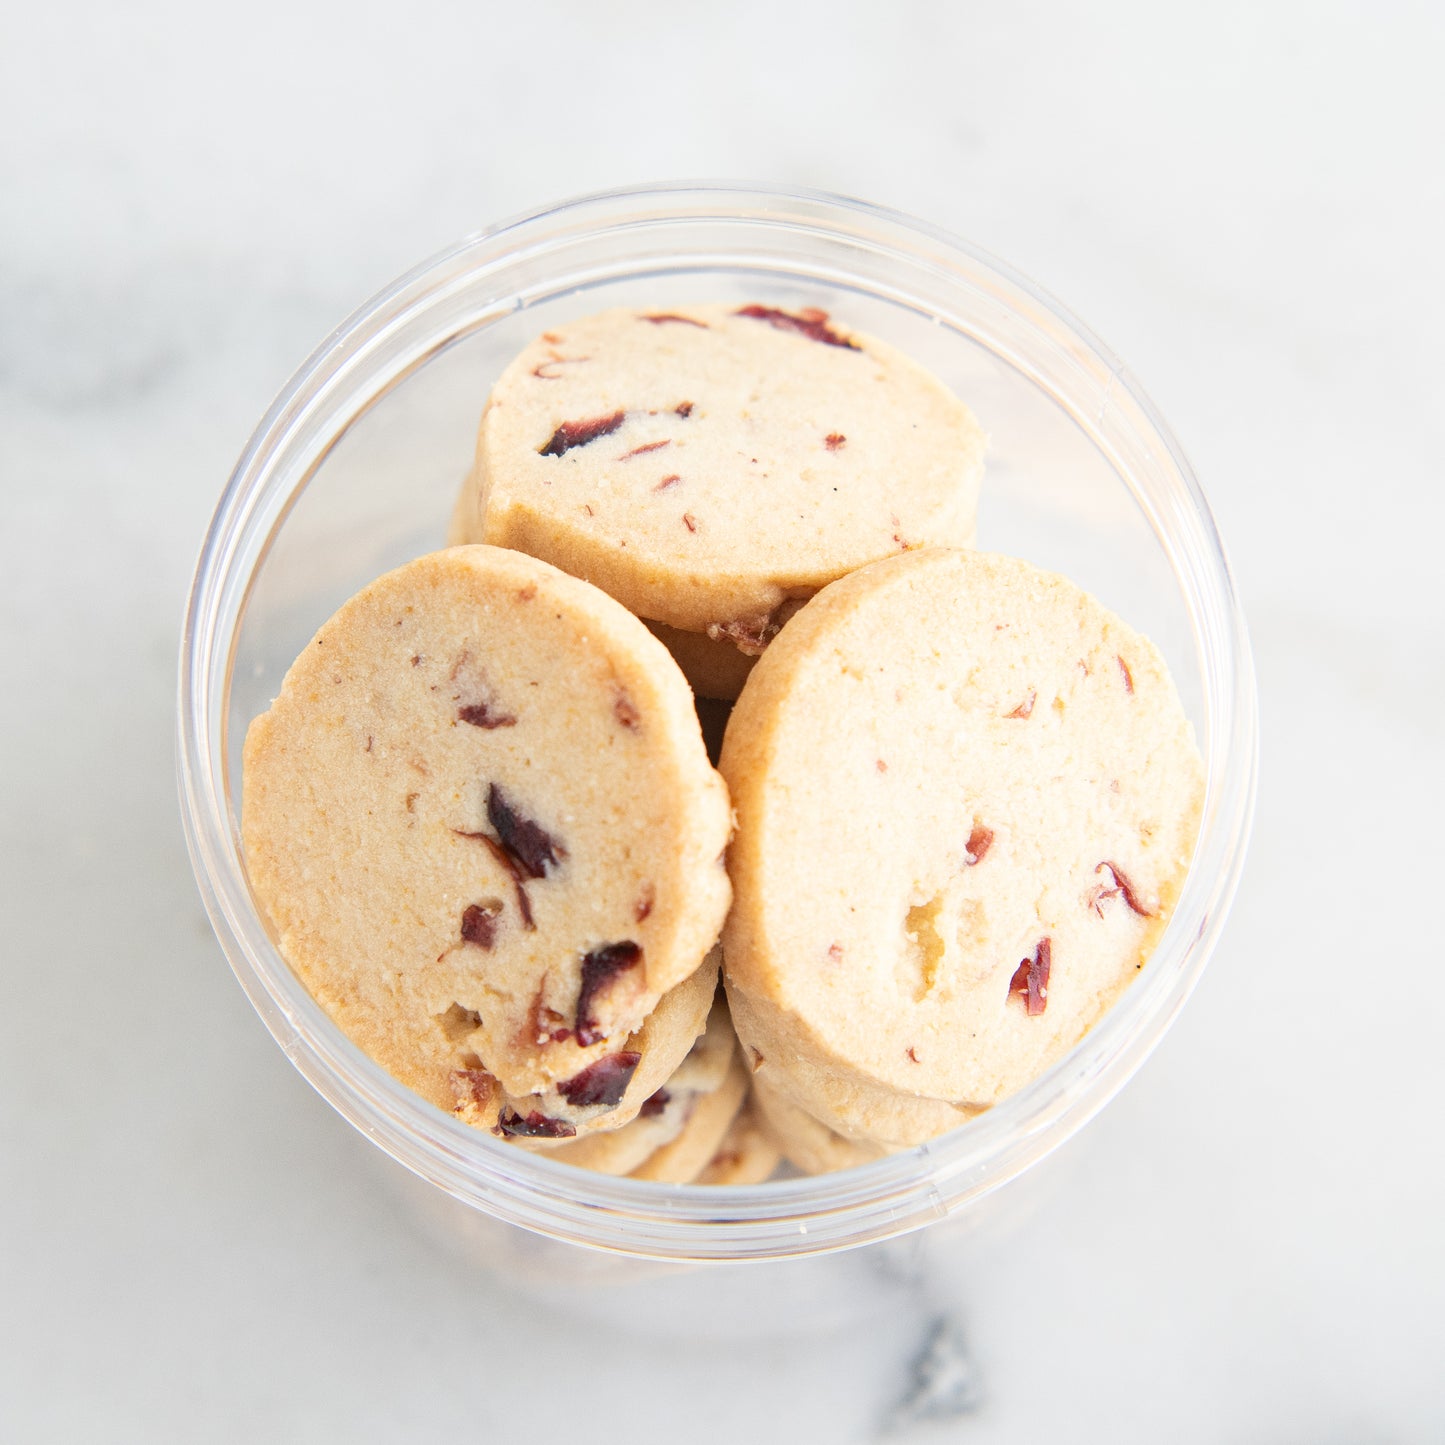 Year Of The Dragon! | Small Cranberry Shortbread Cookies | $13.80 Nett